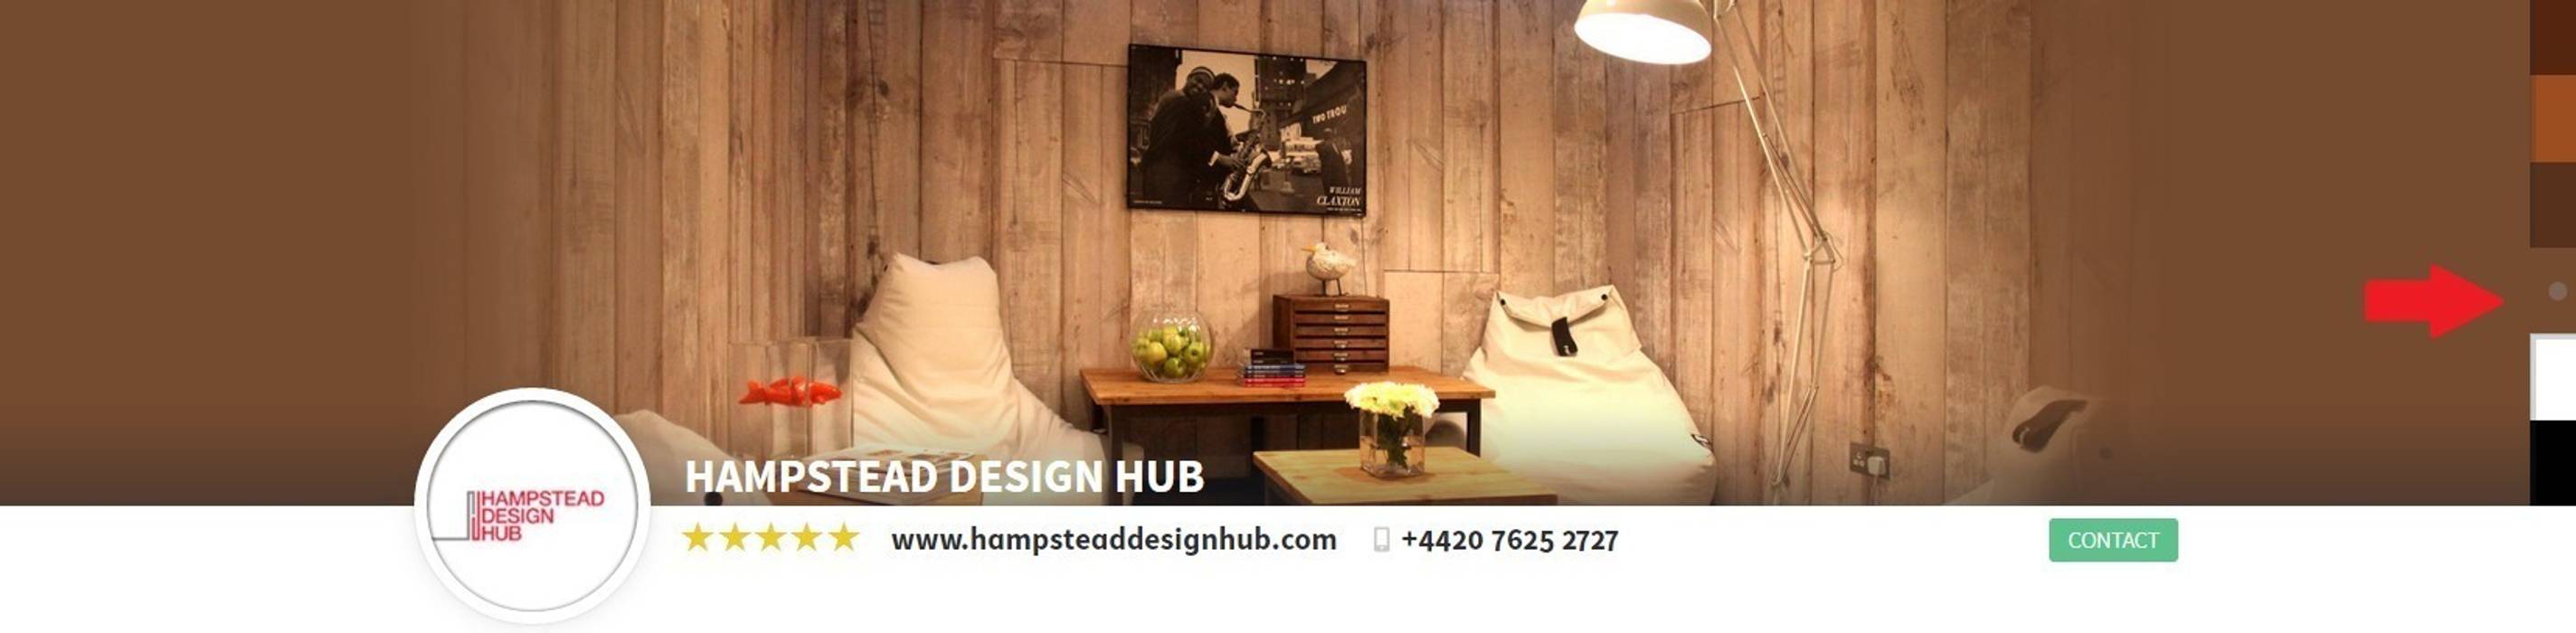 How can I improve my profile visually?, homify UK homify UK